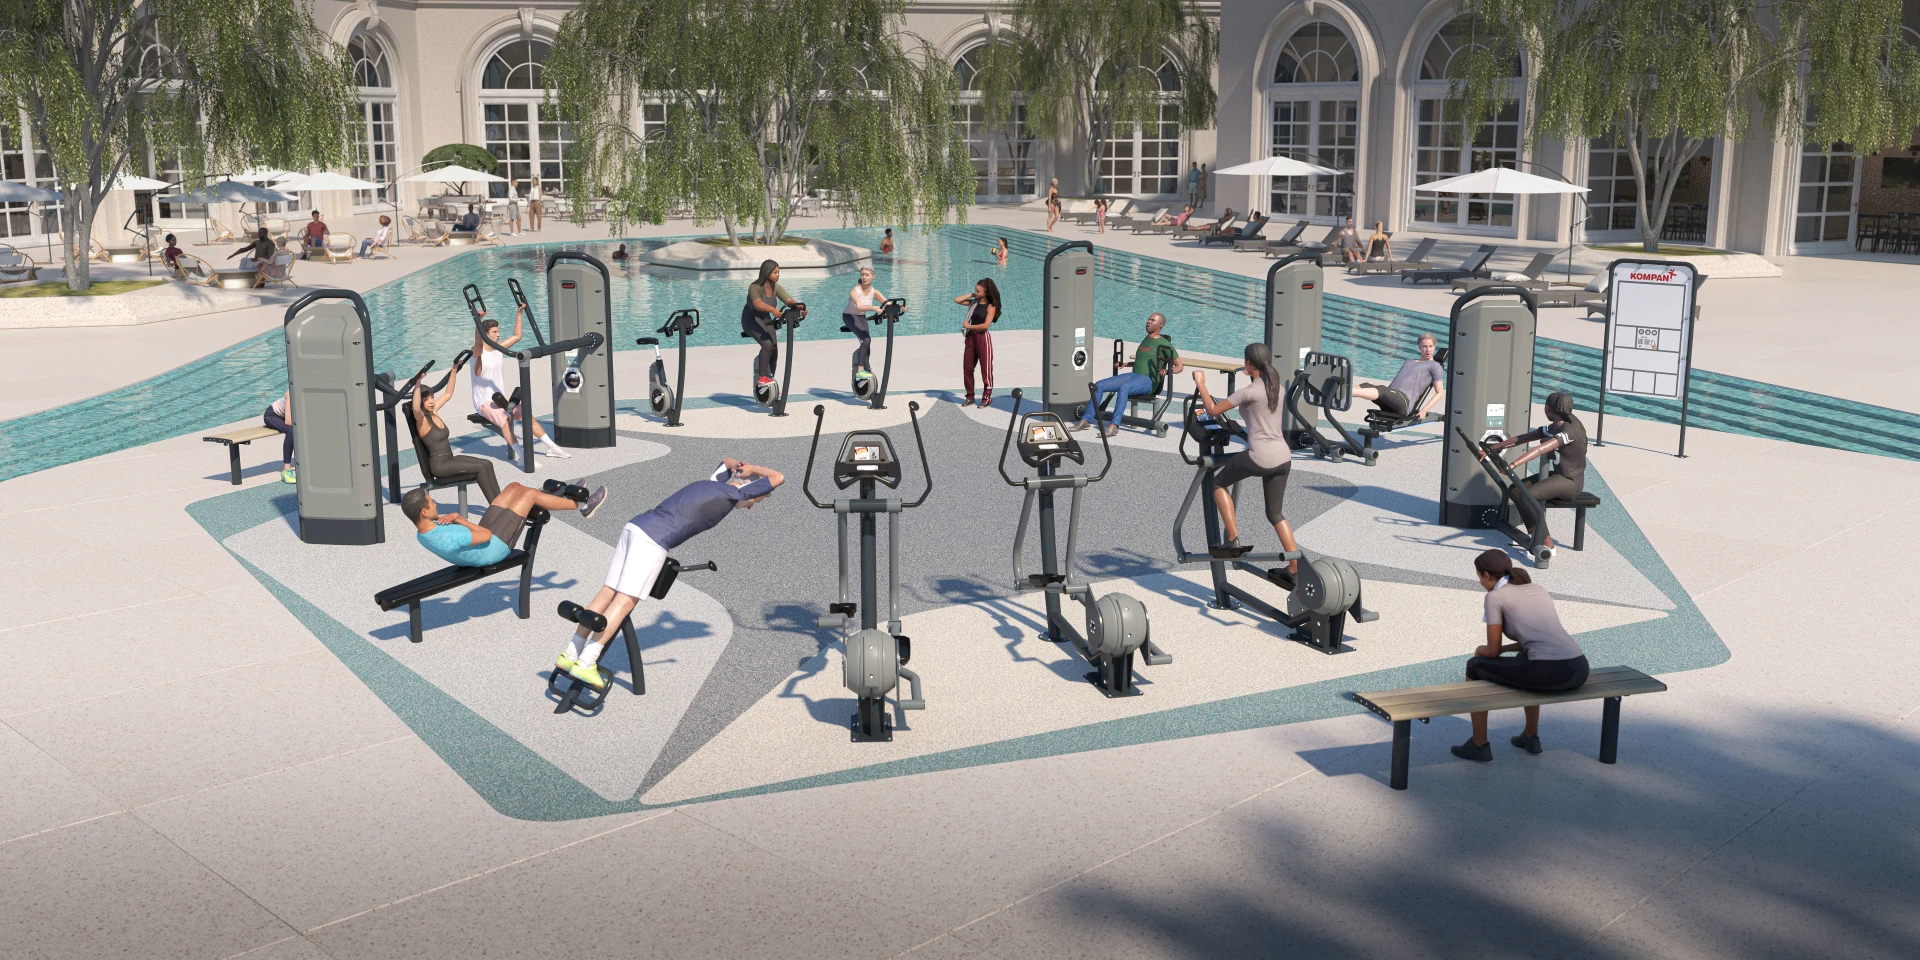 Design concepts for a wellness & fitness area